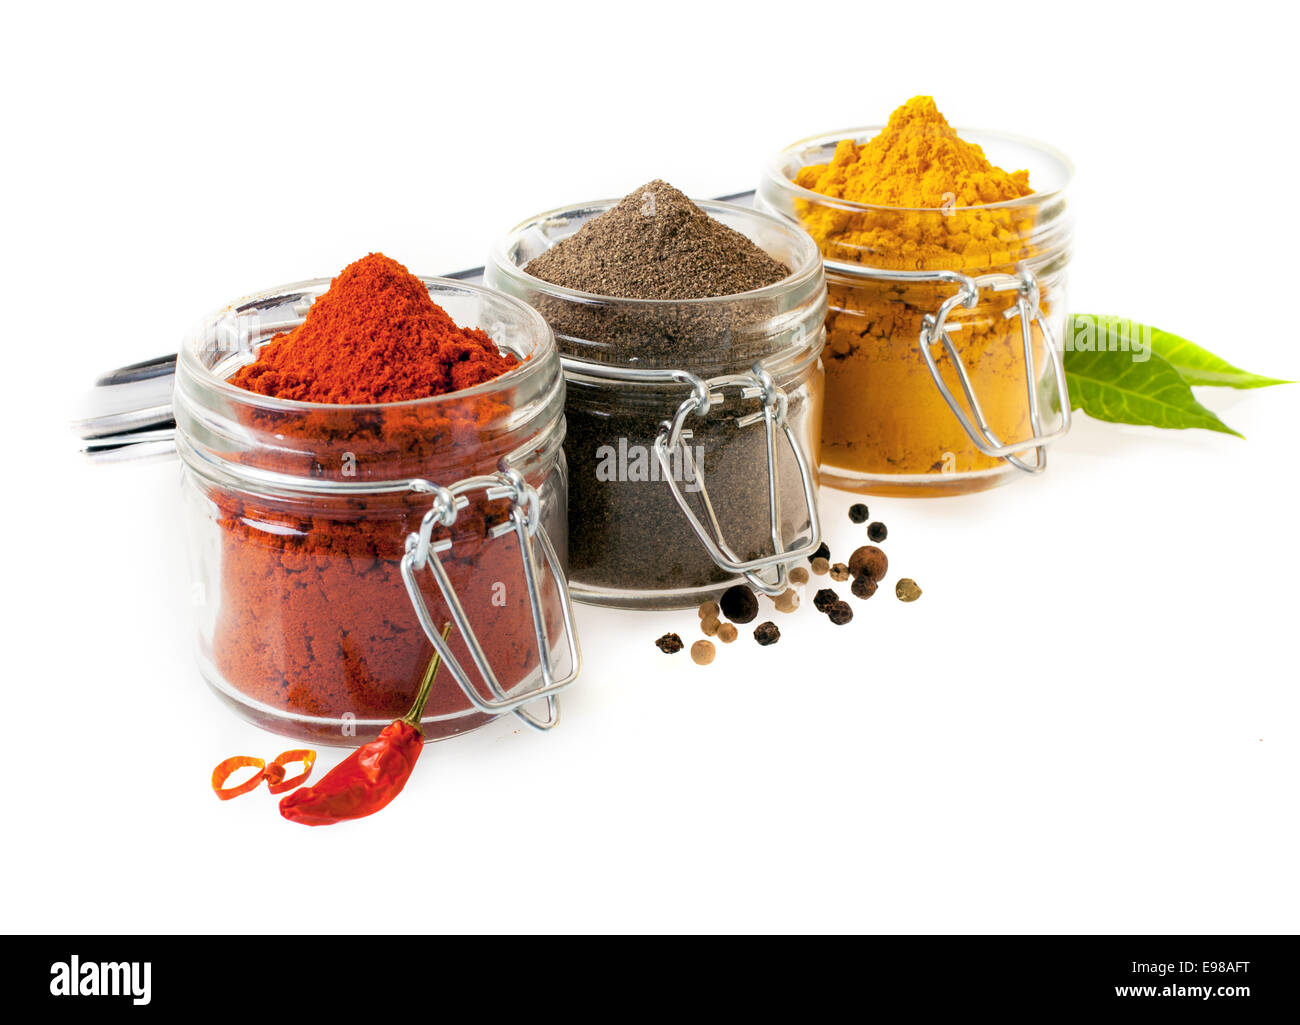 Three glass containers filled with ground culinary spices with chilli peppers, black peppercorns and curry powder on a white background Stock Photo